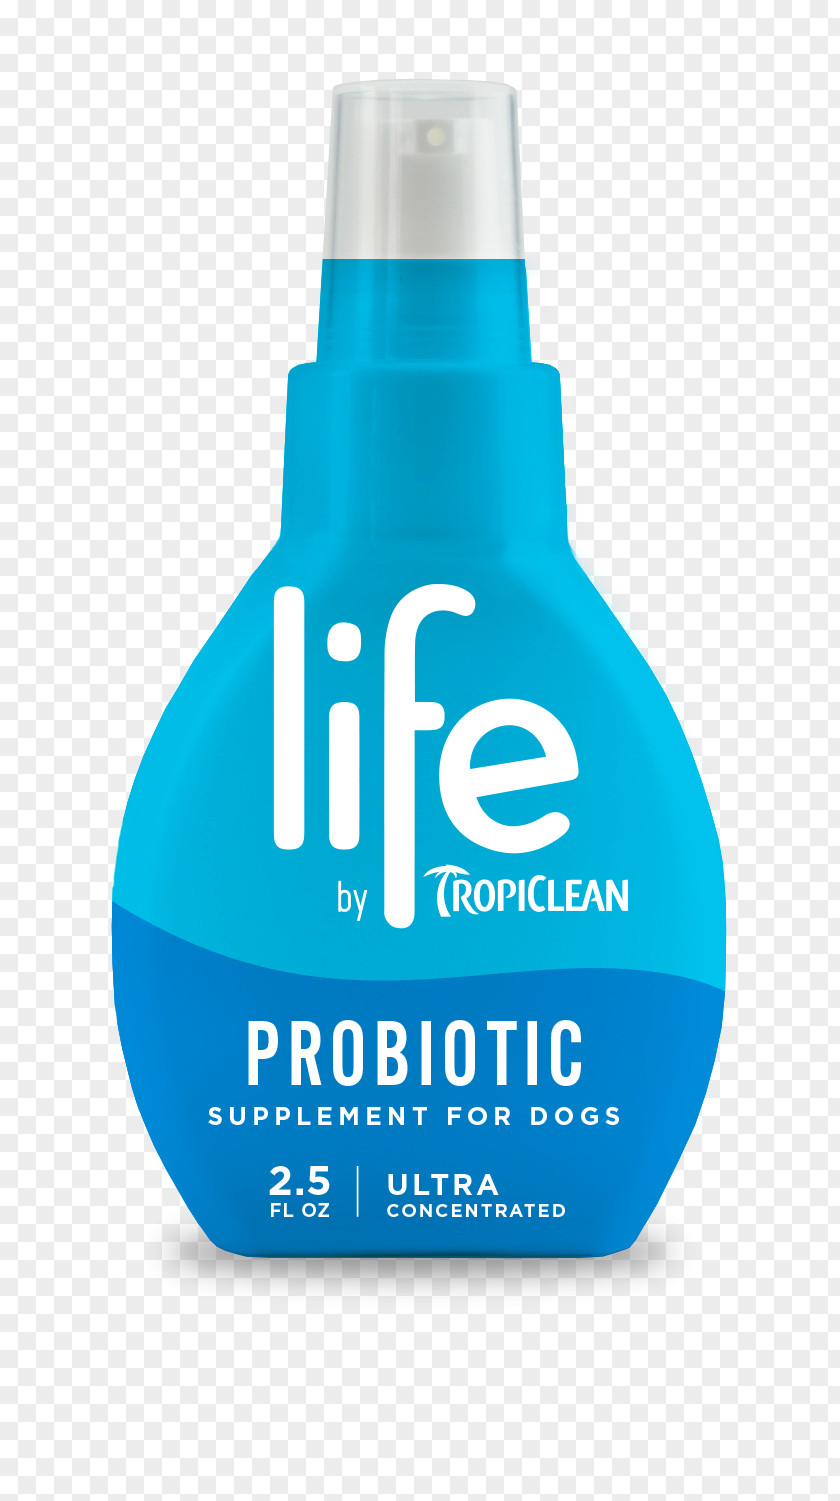 Genesis Archery Equipment Rosewood Life By Tropiclean Probiotic 75ml Supplement For Dogs Dietary PNG